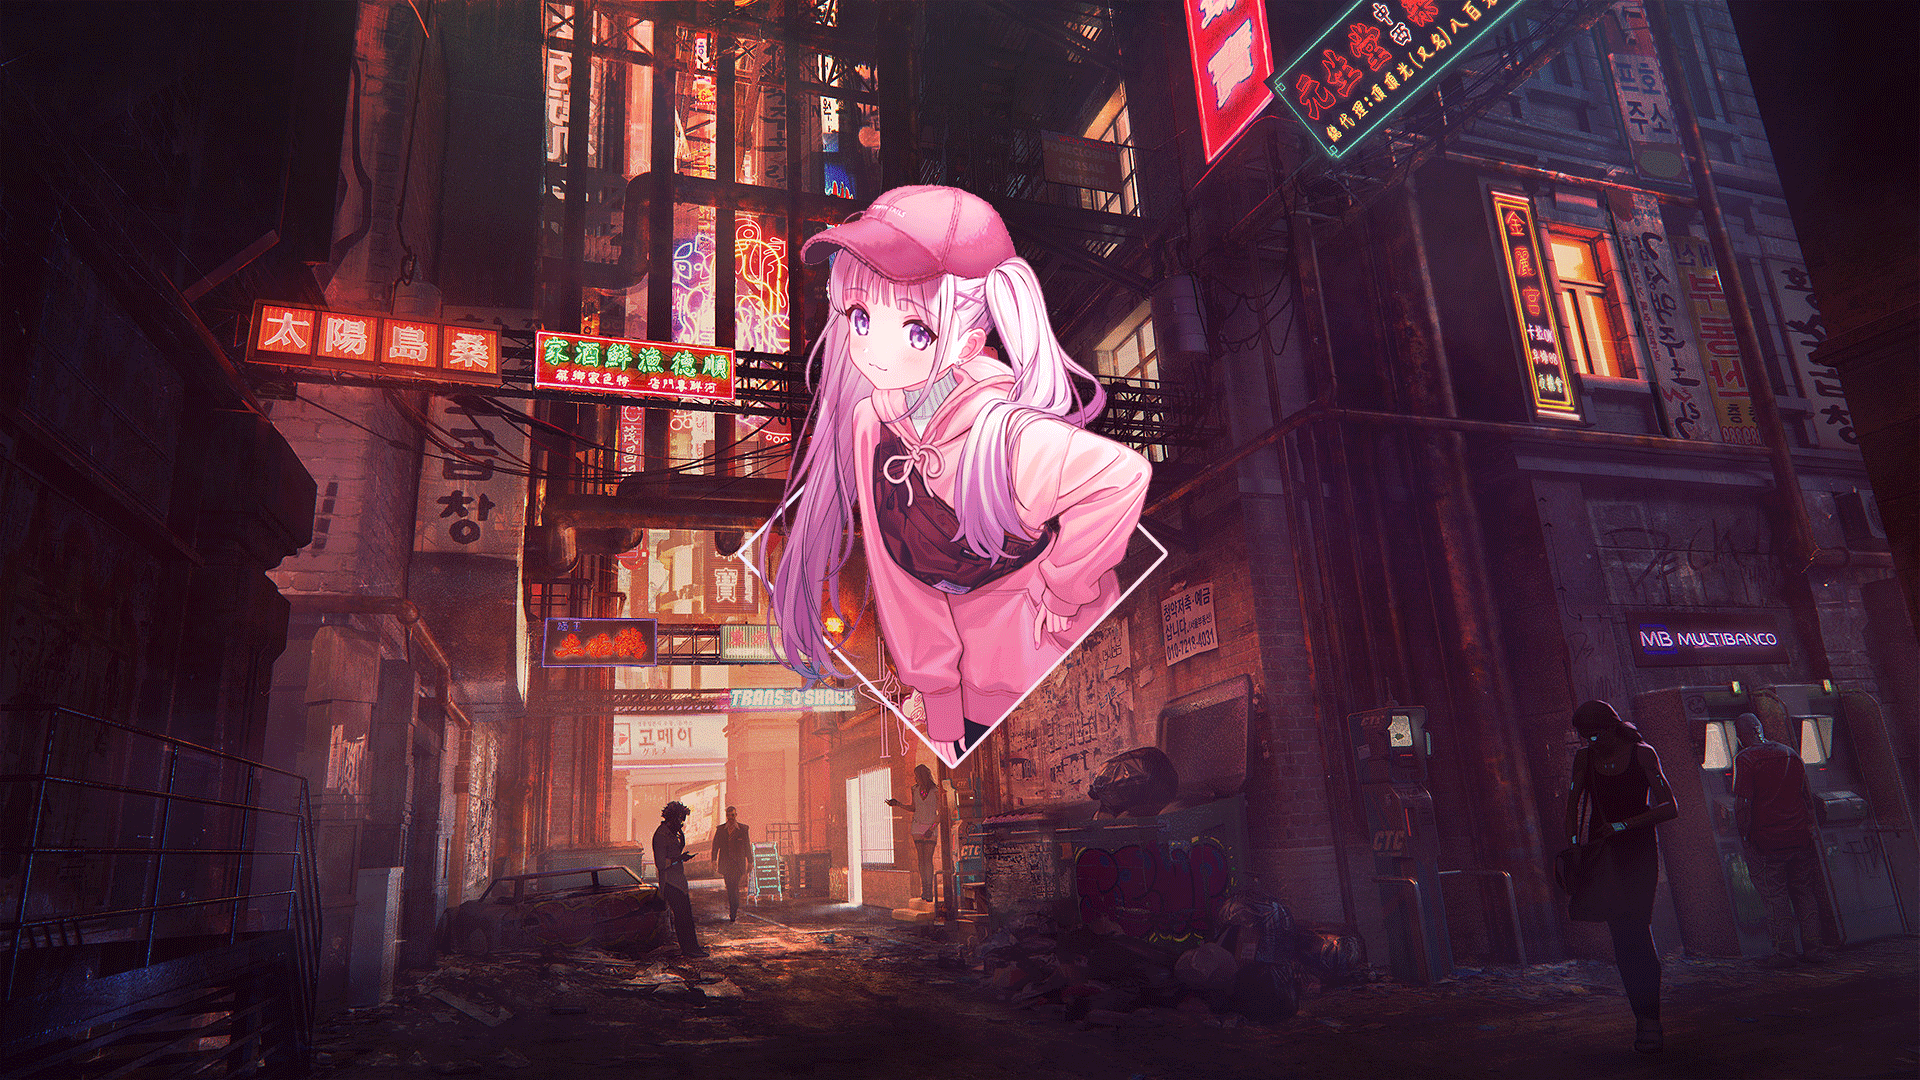 Anime Anime Girls Street Art Digital Art Photoshop Platinum Conception Wallpapers Picture In Picture 1920x1080